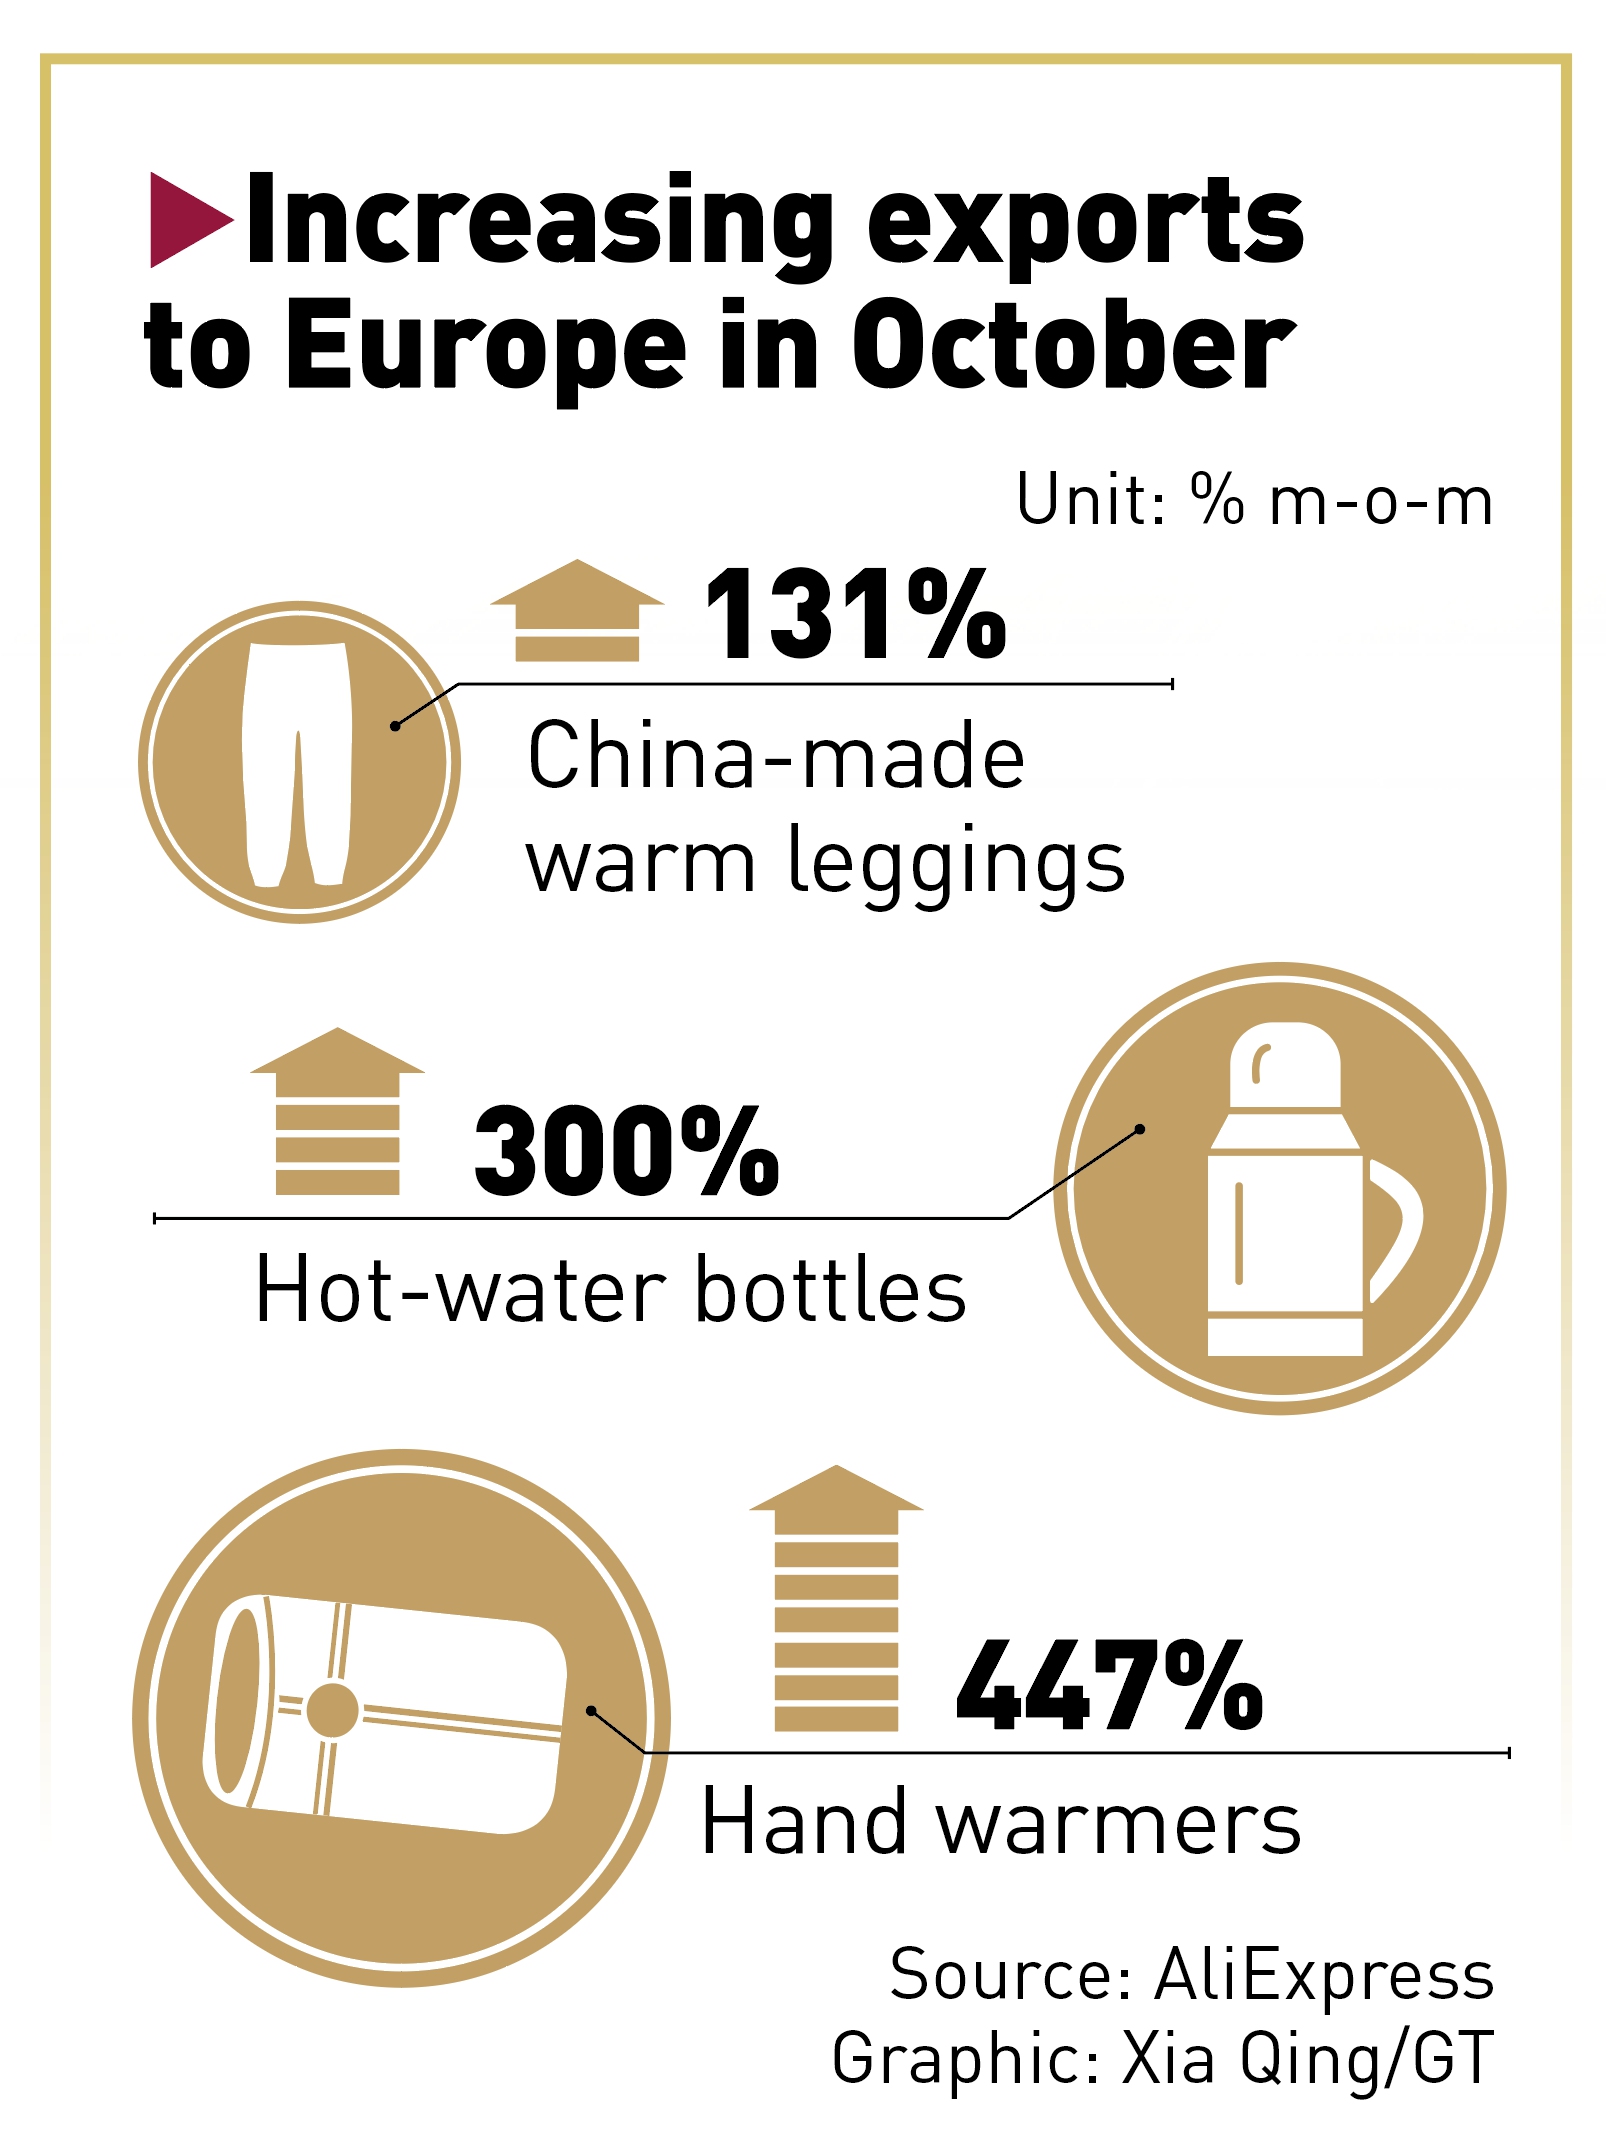 Increasing exports to Europe in October Graphic: Xia Qing/GT